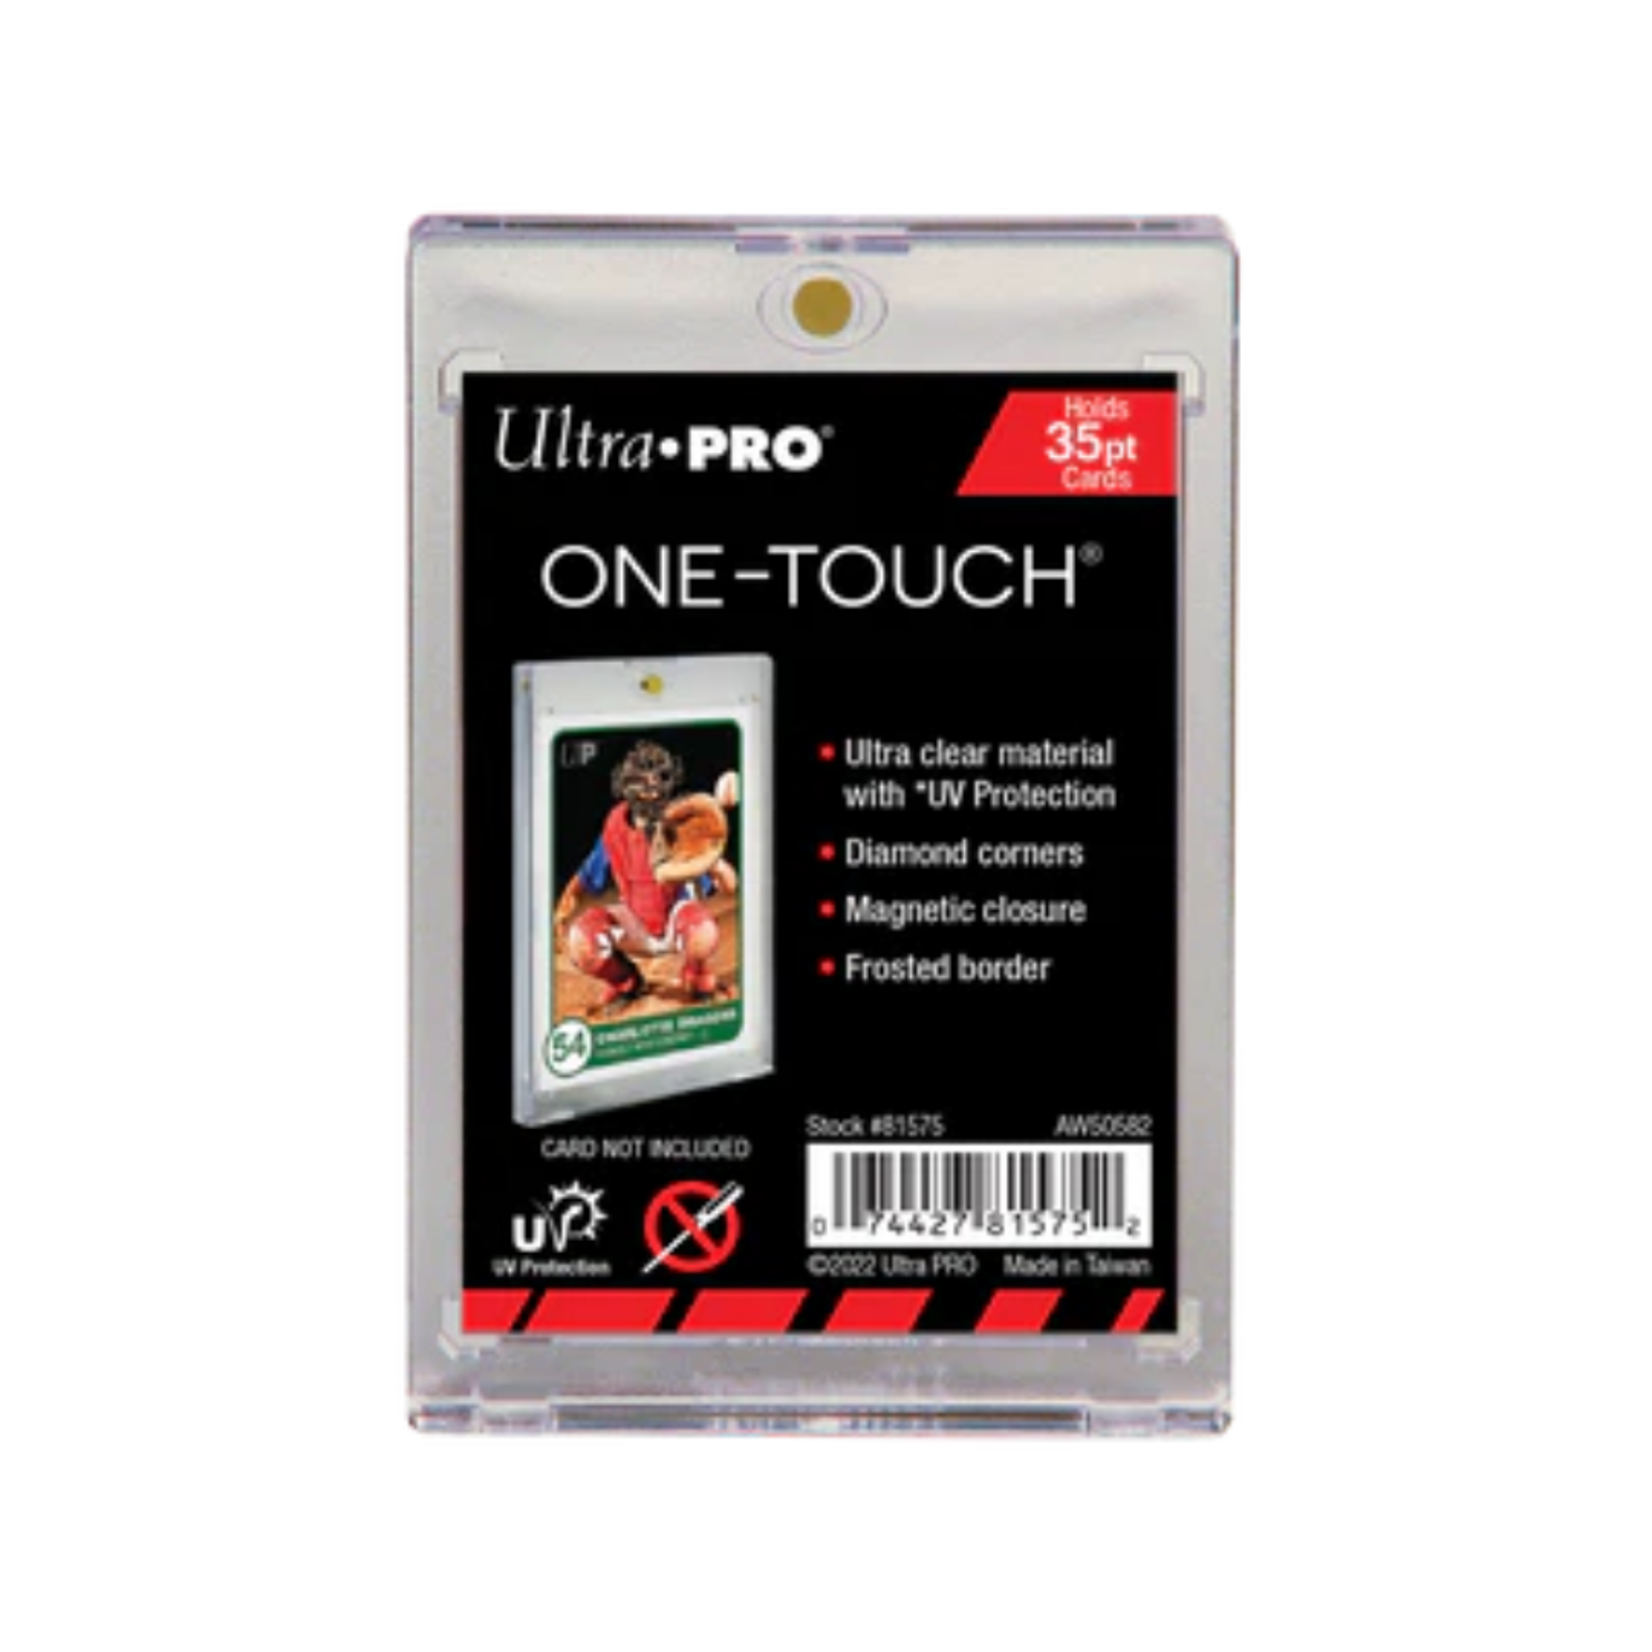 Ultra Pro One-Touch 35pt